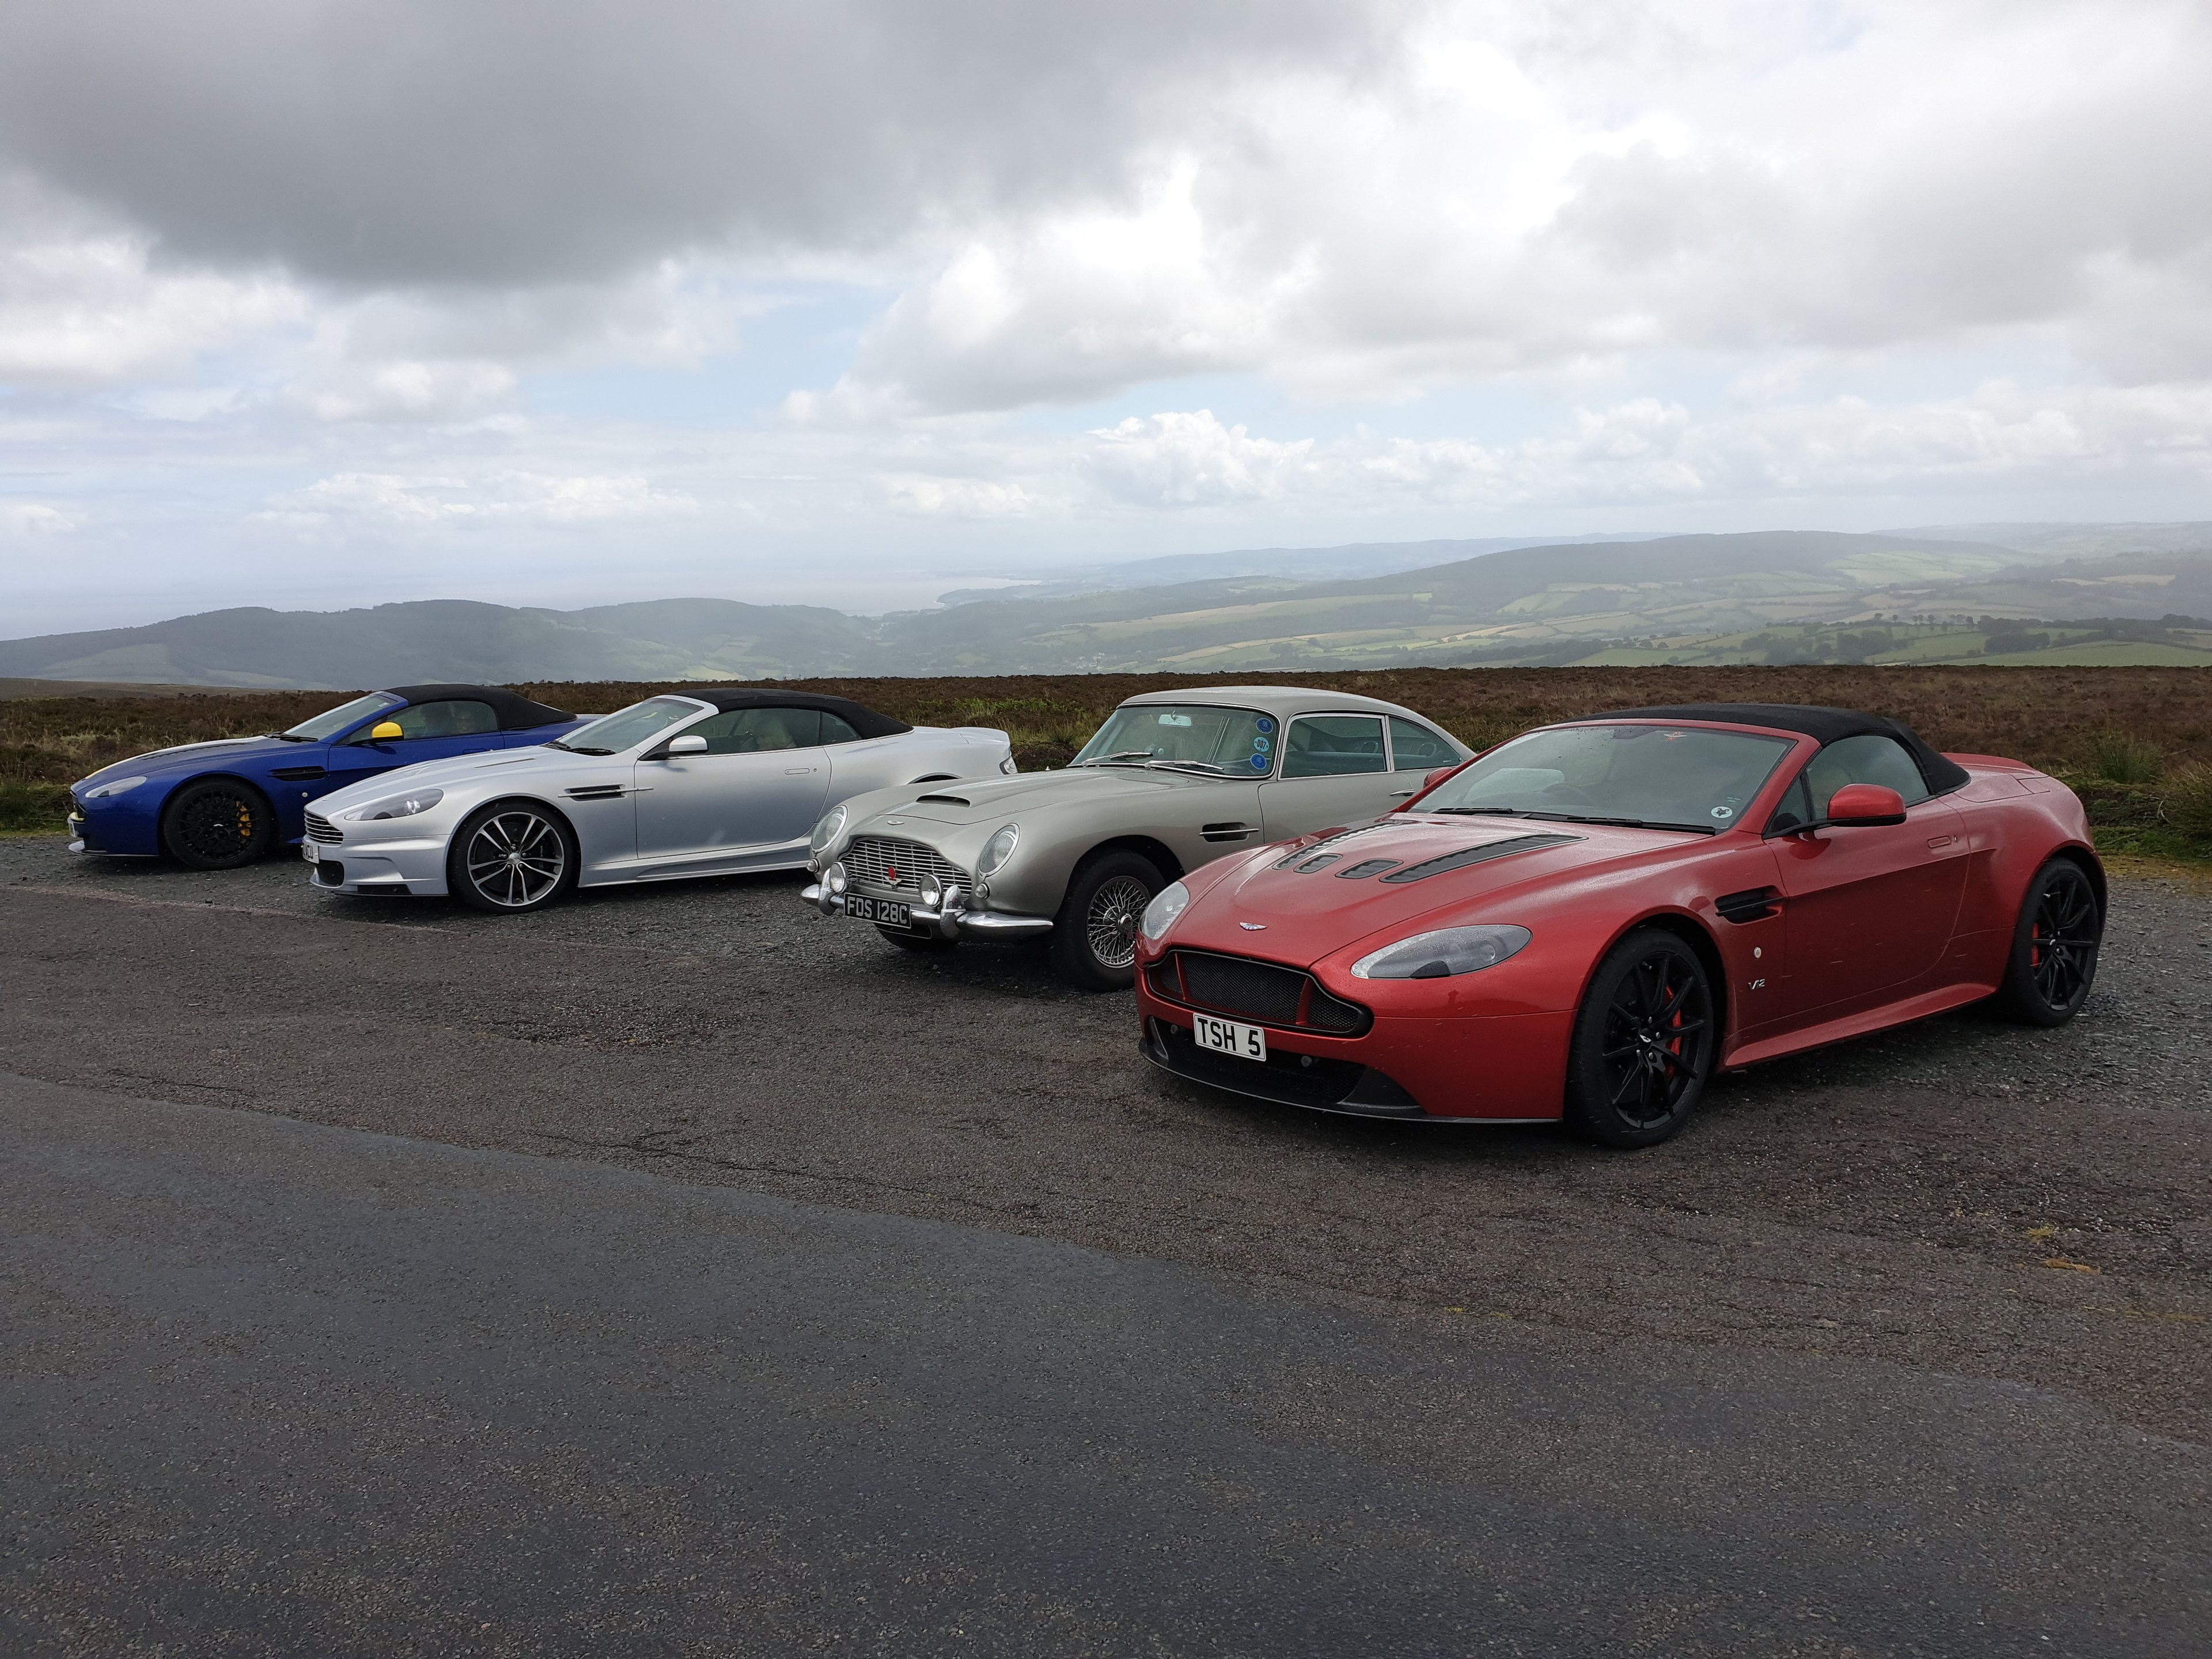 So what have you done with your Aston today? (Vol. 2) - Page 39 - Aston Martin - PistonHeads